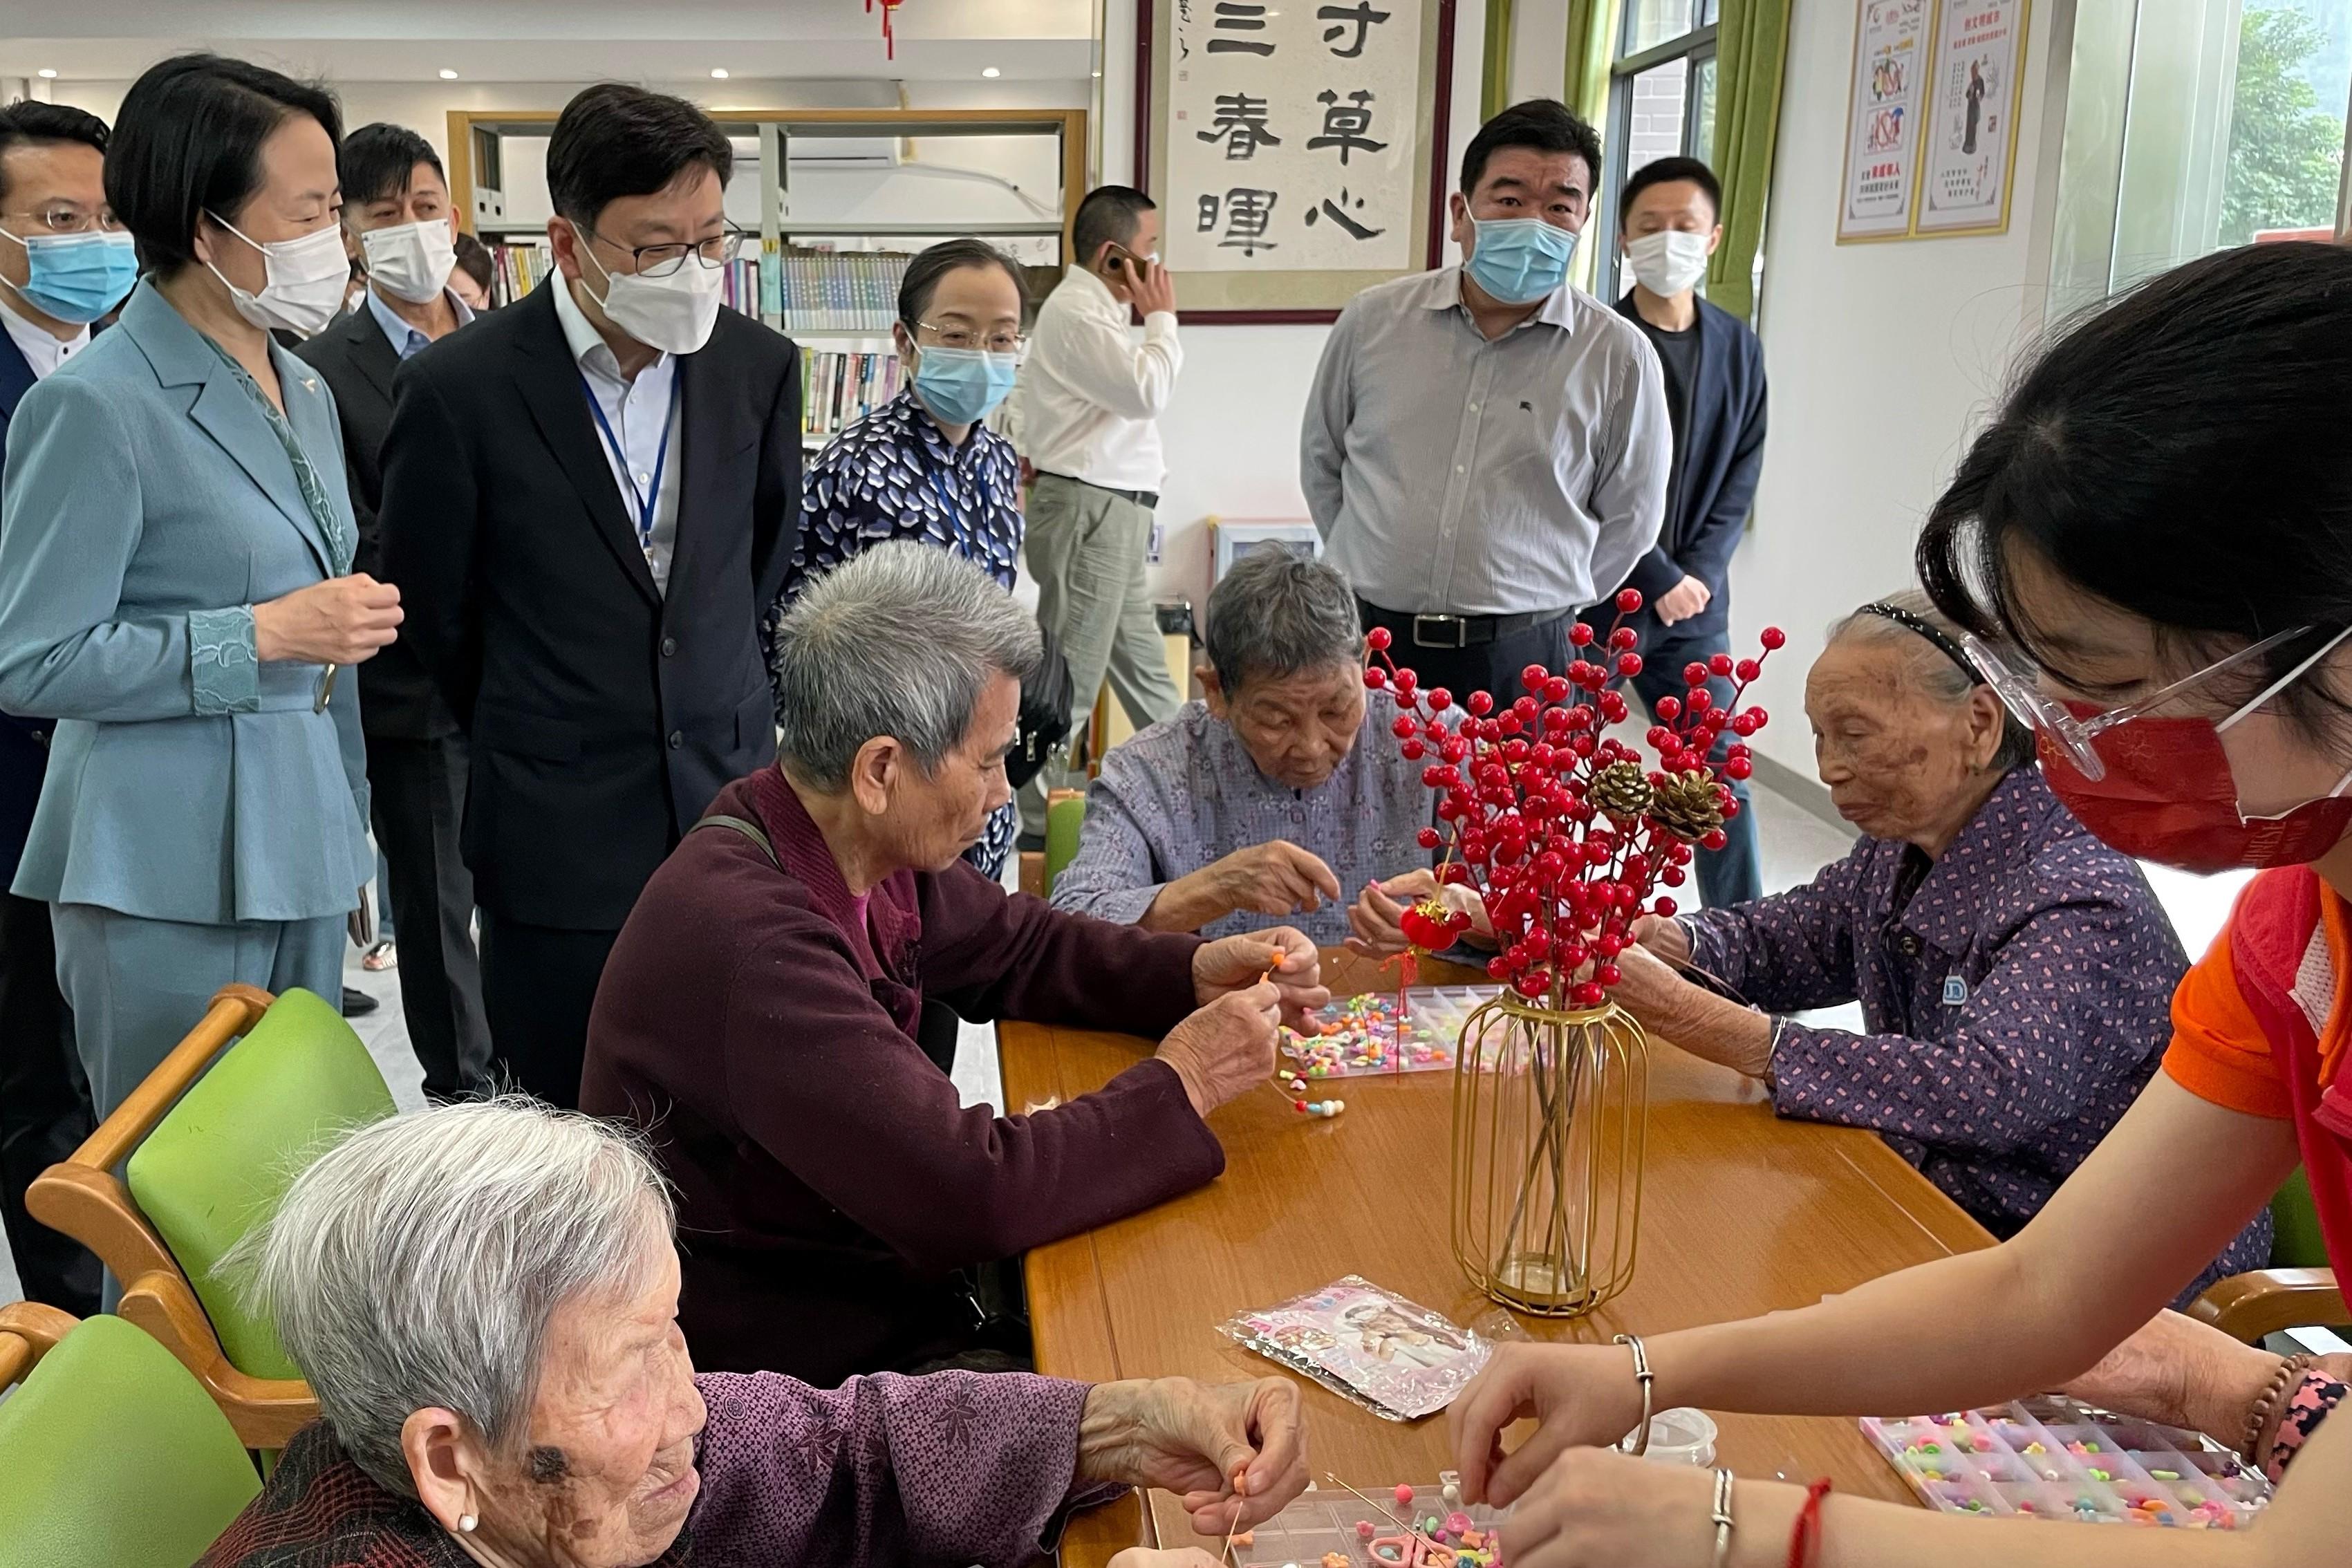 The Secretary for Labour and Welfare, Mr Chris Sun, led the Hong Kong social welfare sector delegation on a visit to Guangdong and visited a residential care home for the elderly in Nansha District of Guangzhou Municipality yesterday afternoon (April 25). Photo shows Mr Sun (standing, front row, second left) visiting the elderly in the care home.